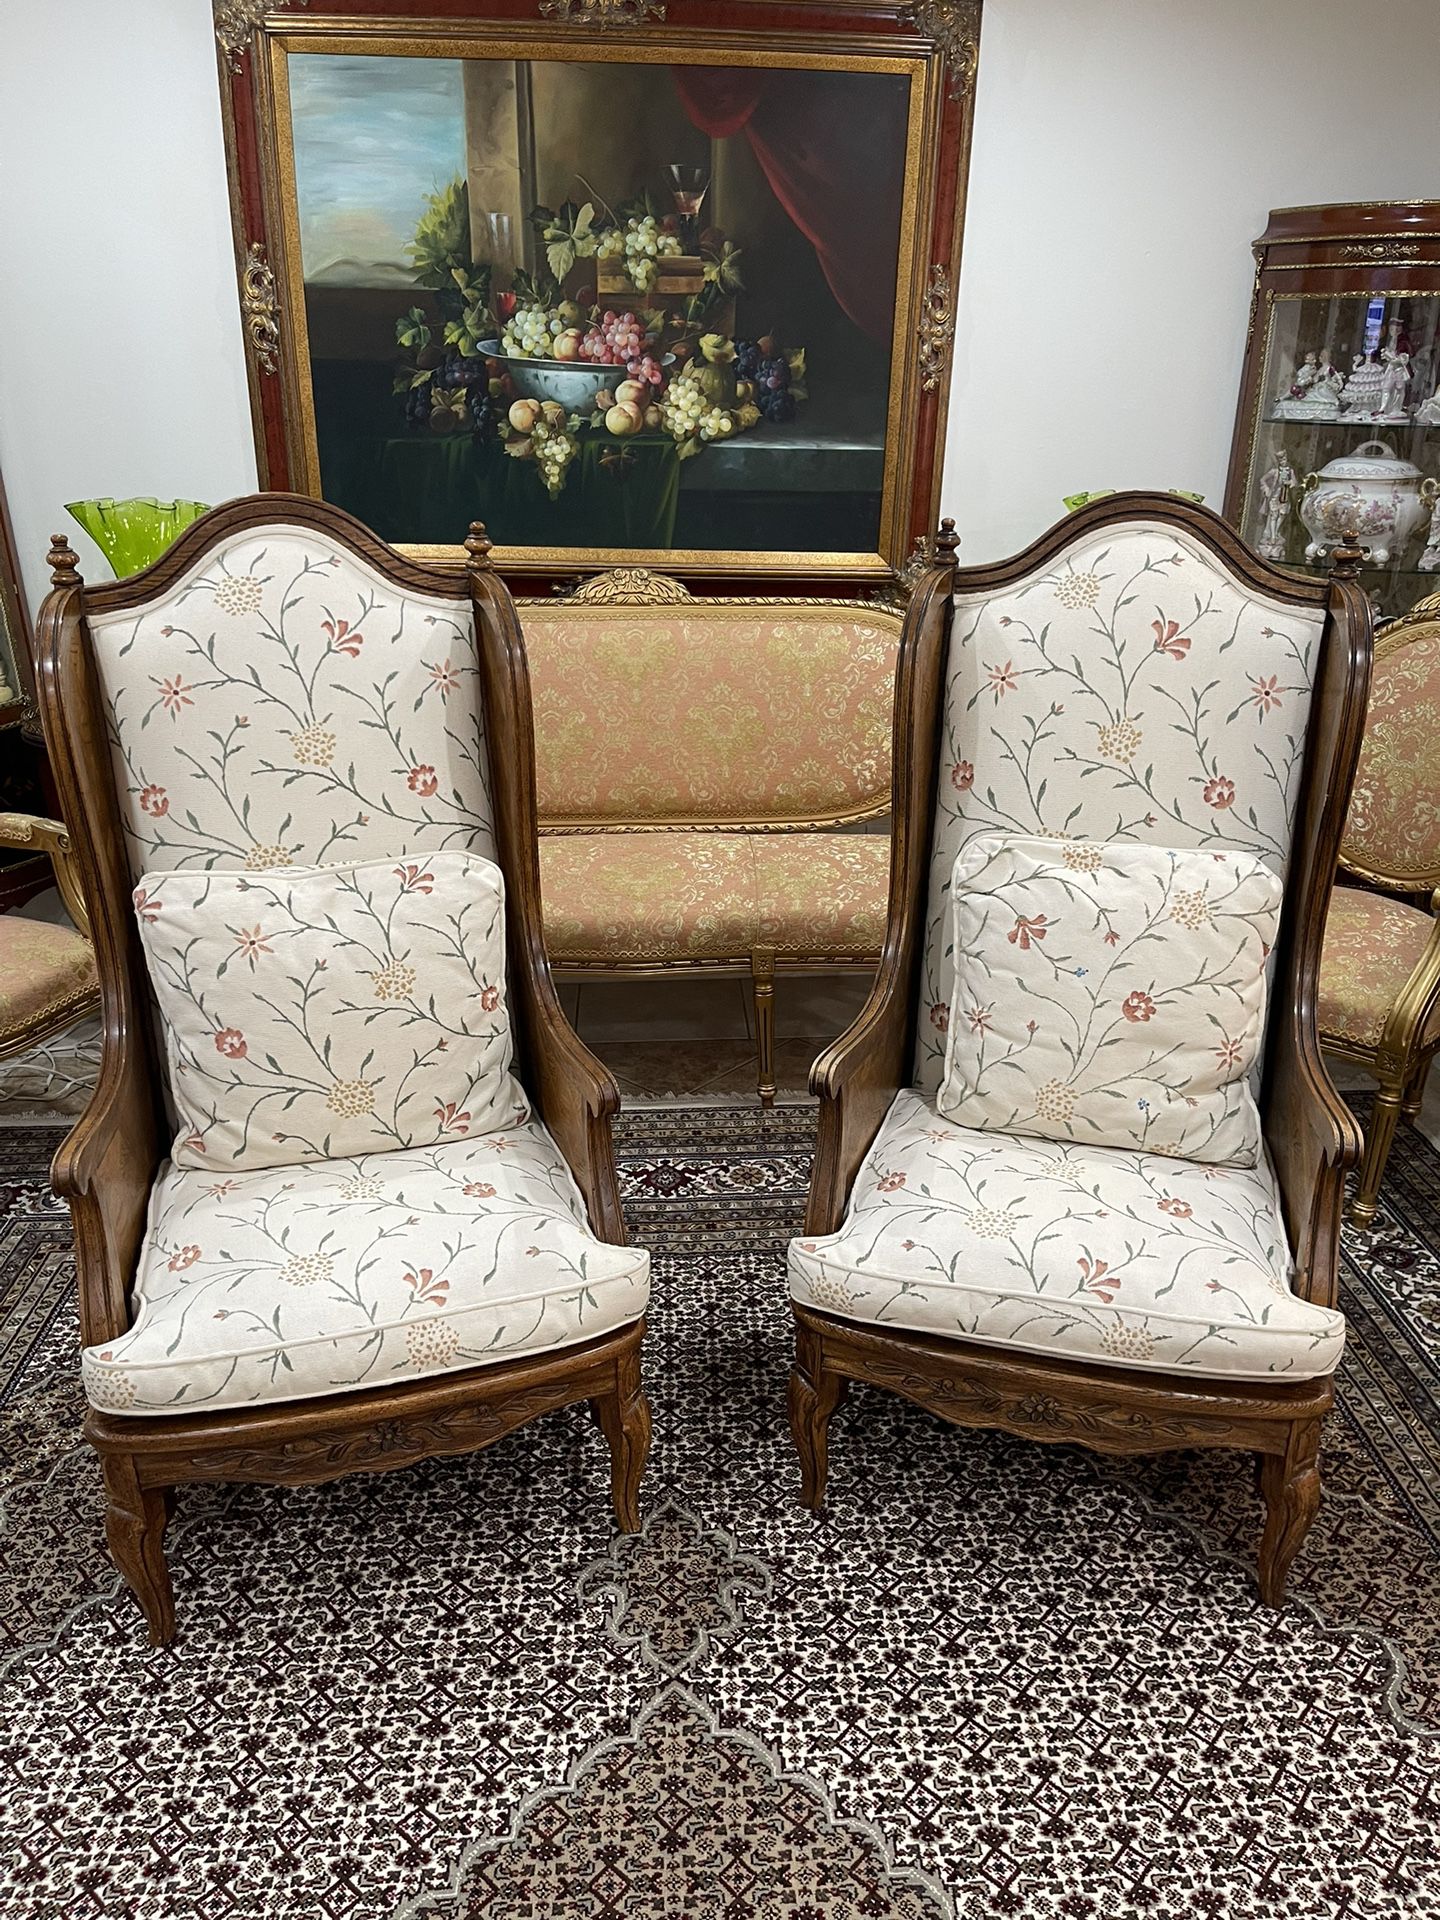 A Pair of Stunning Antique French Throne Accent Living-Room Chairs🌹